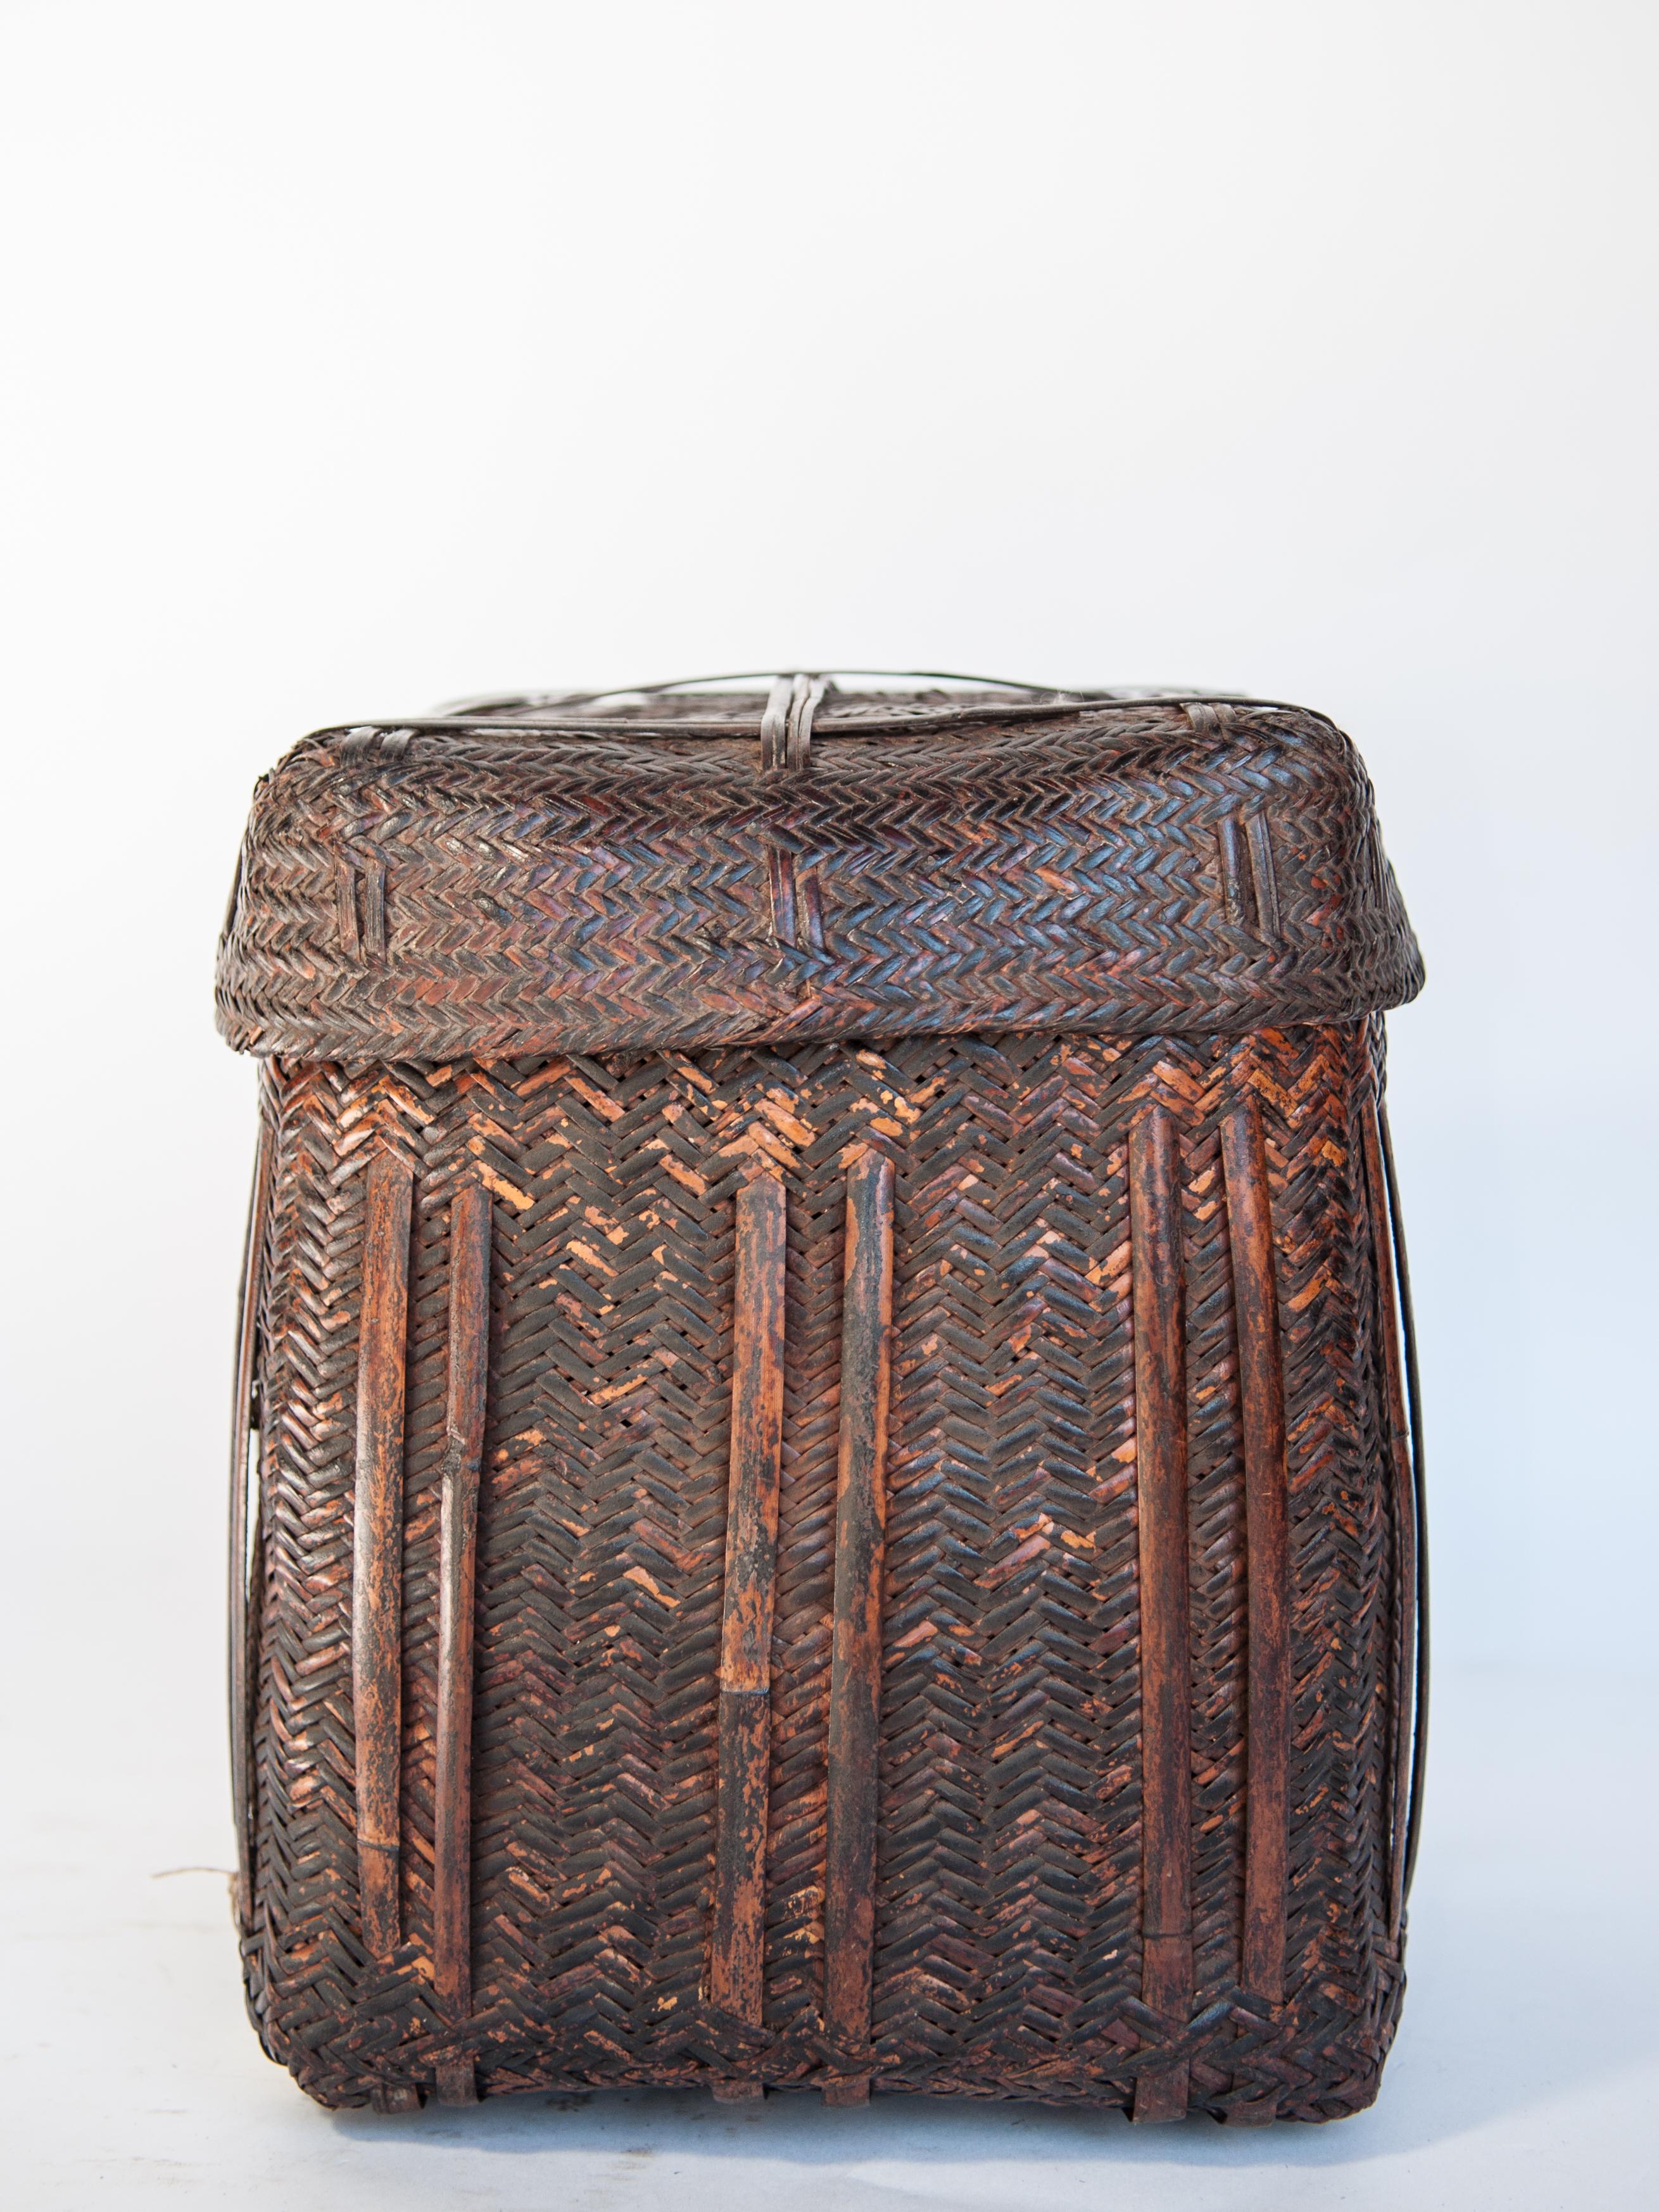 Nepalese Rustic Tribal Storage Basket with Lid from the Tamang of Nepal, Mid-20th Century